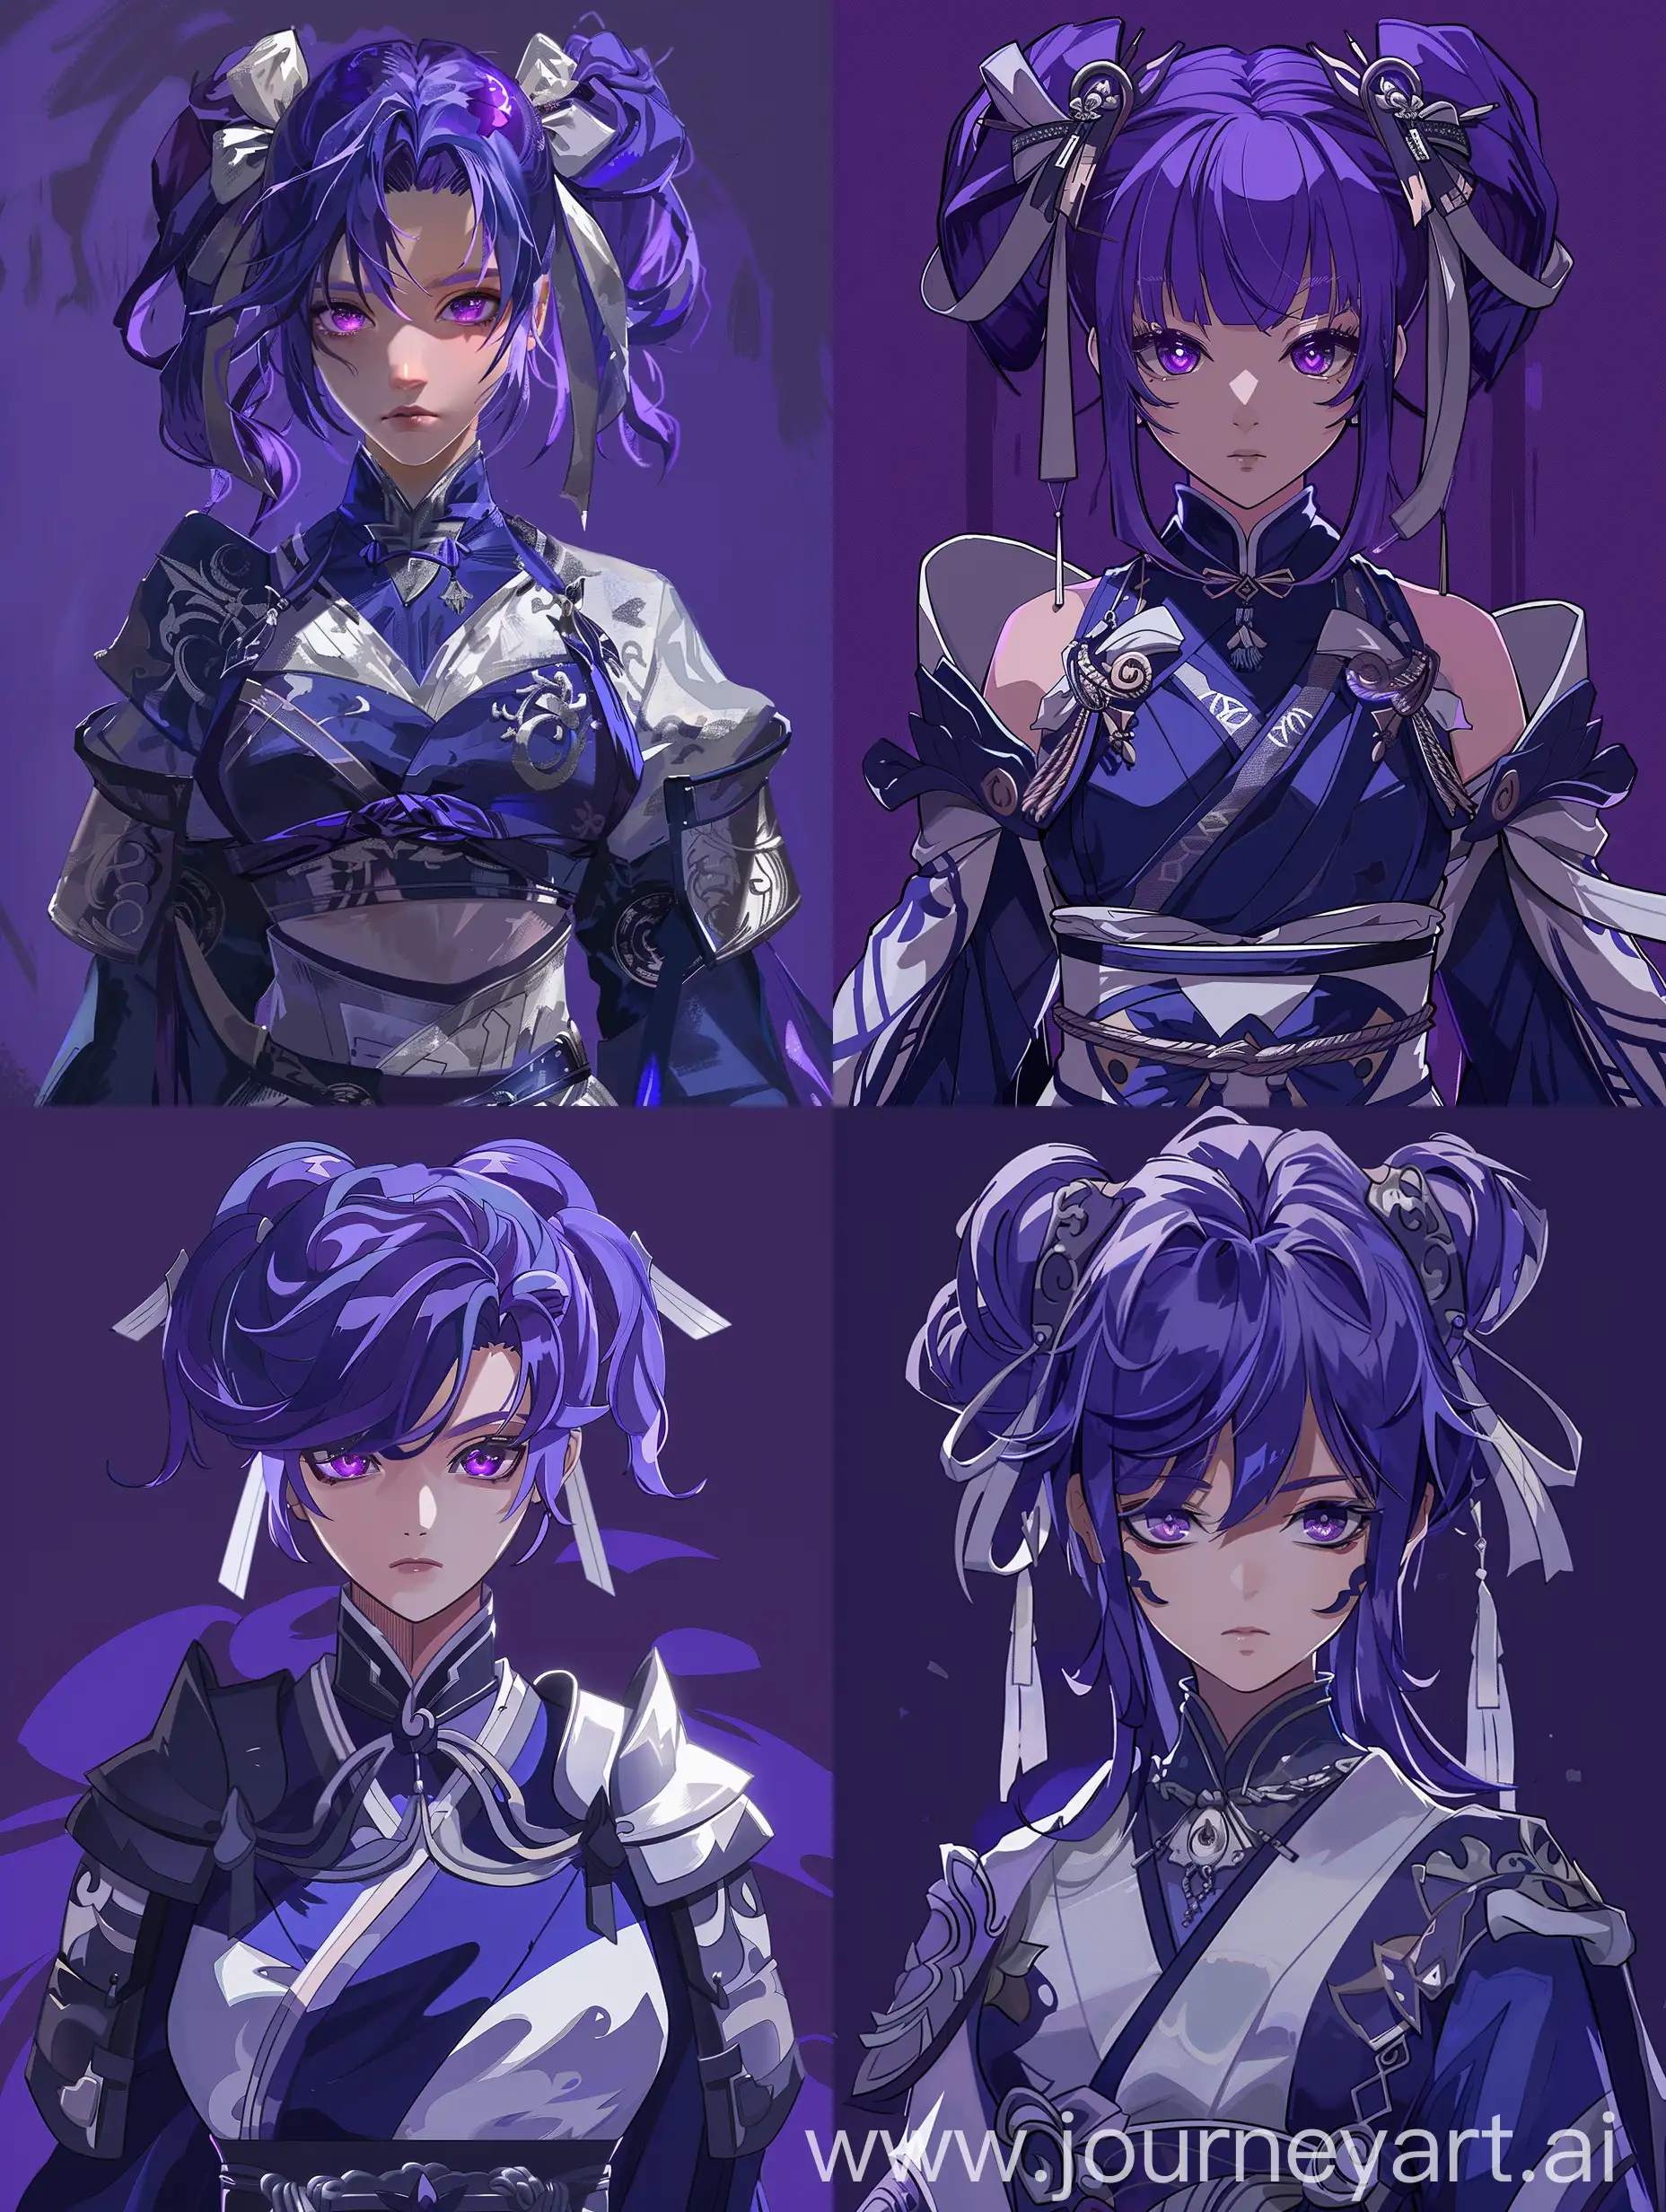 In the style of Shen bou ke anime, a purple-haired female character in dark blue and white armor with silver accents. Her hair is tied back in two ribbons and she has beautiful violet eyes. She wears an elegant kimono dress that covers one shoulder and looks very serious. The background color should be deep purples. --ar 3:4